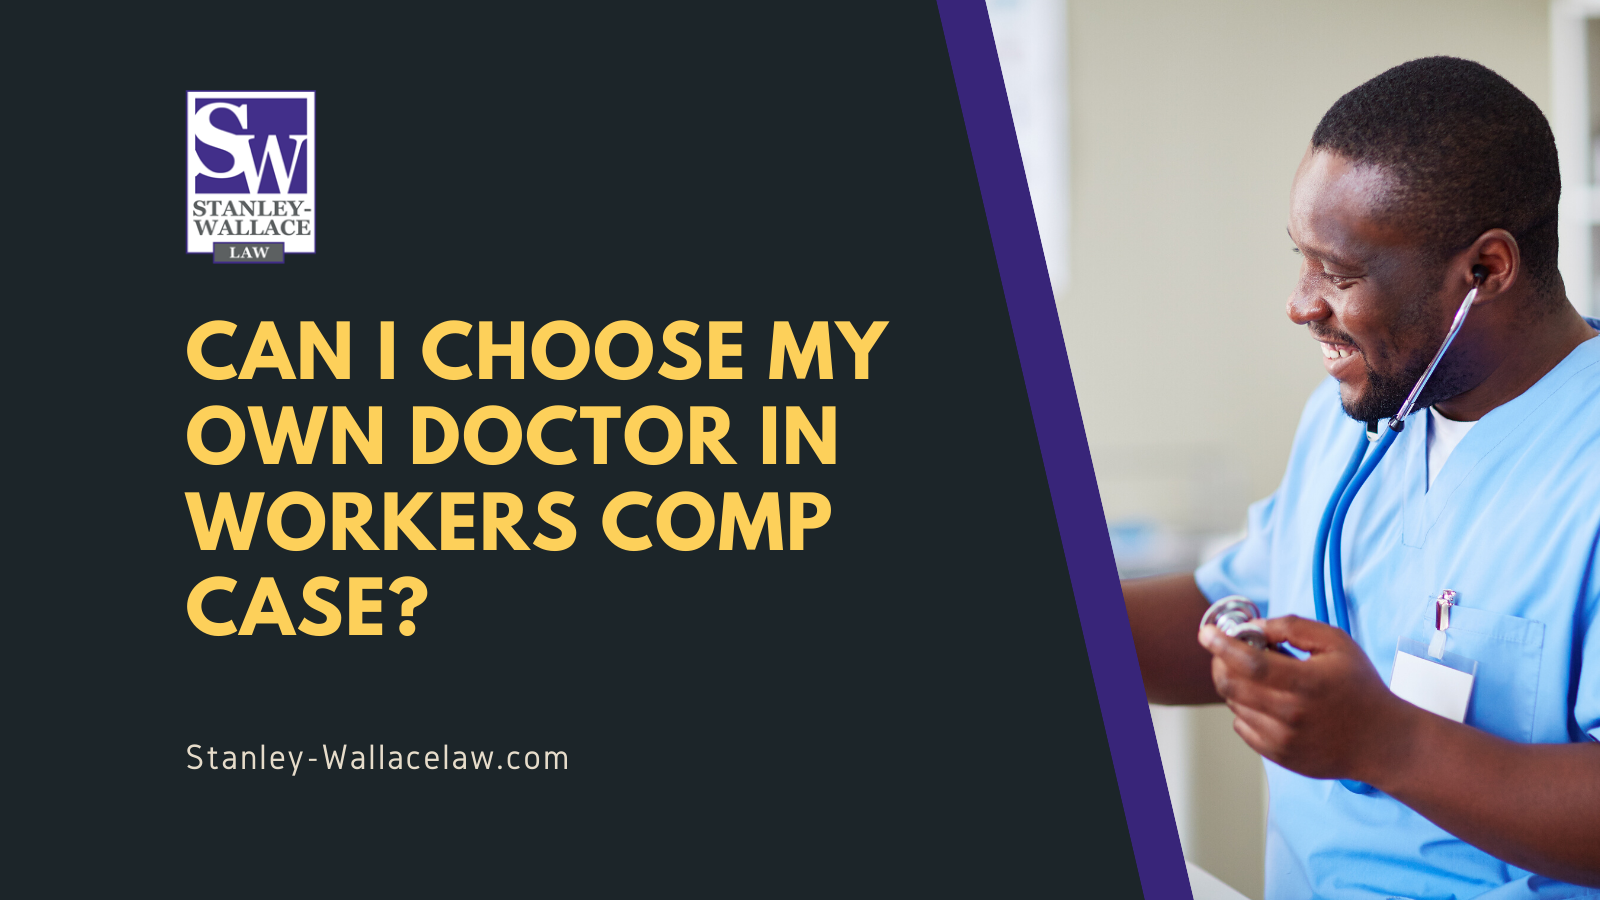 Can I choose my own doctor in workers comp case - Stanley-Wallace Law - slidell louisiana